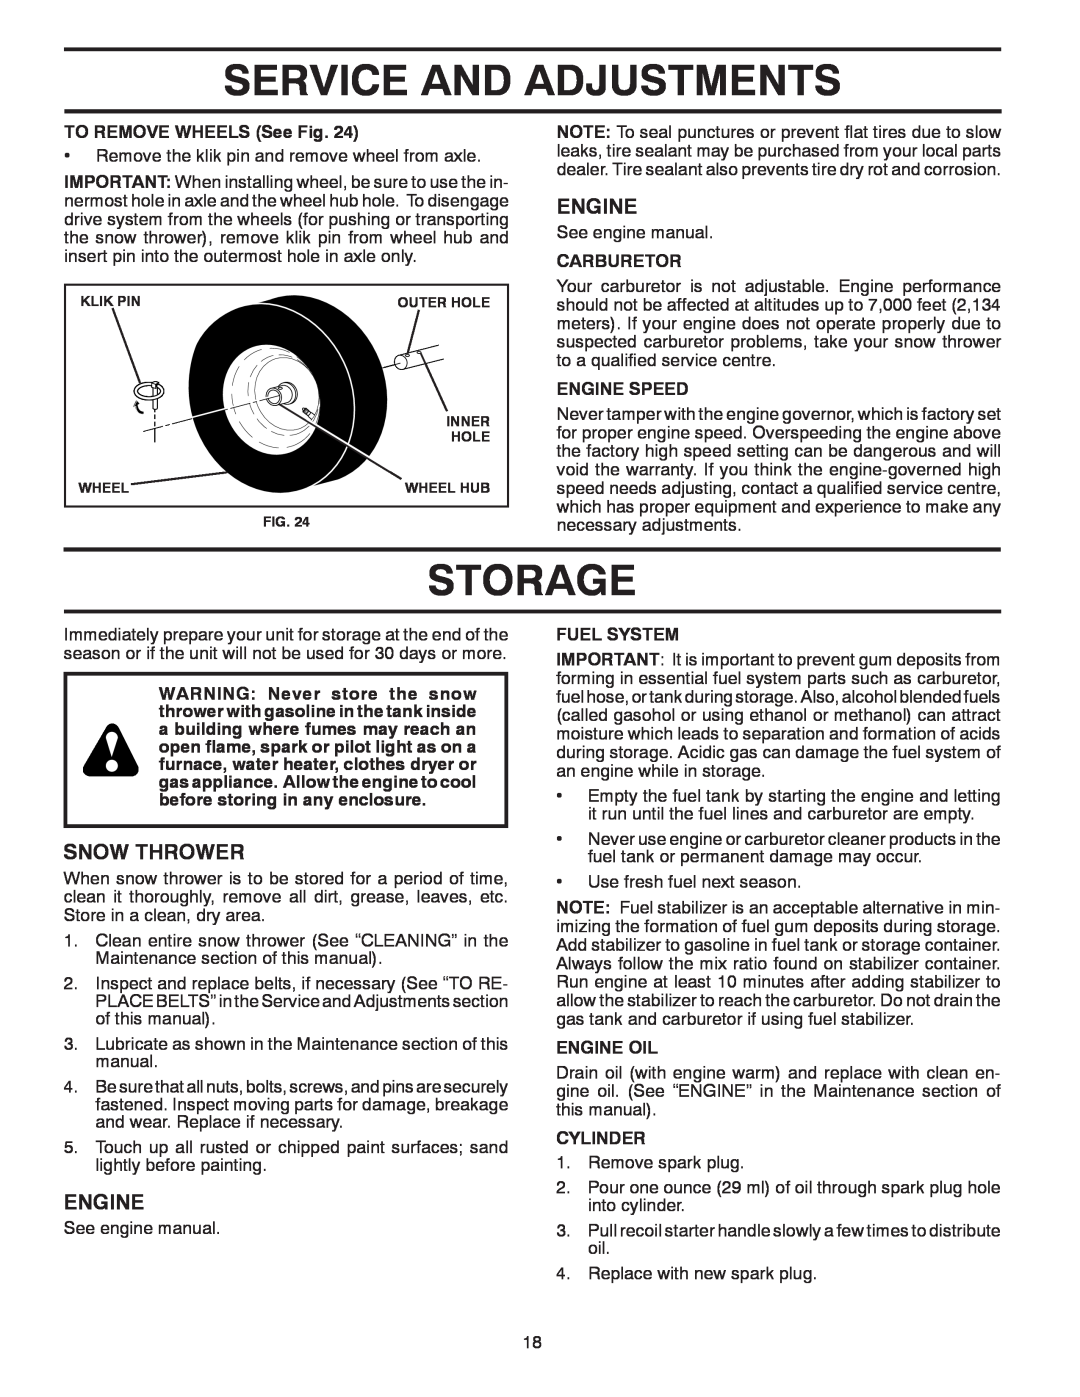 Poulan 414949 Storage, Service And Adjustments, Snow Thrower, TO REMOVE WHEELS See Fig, Carburetor, Engine Speed 